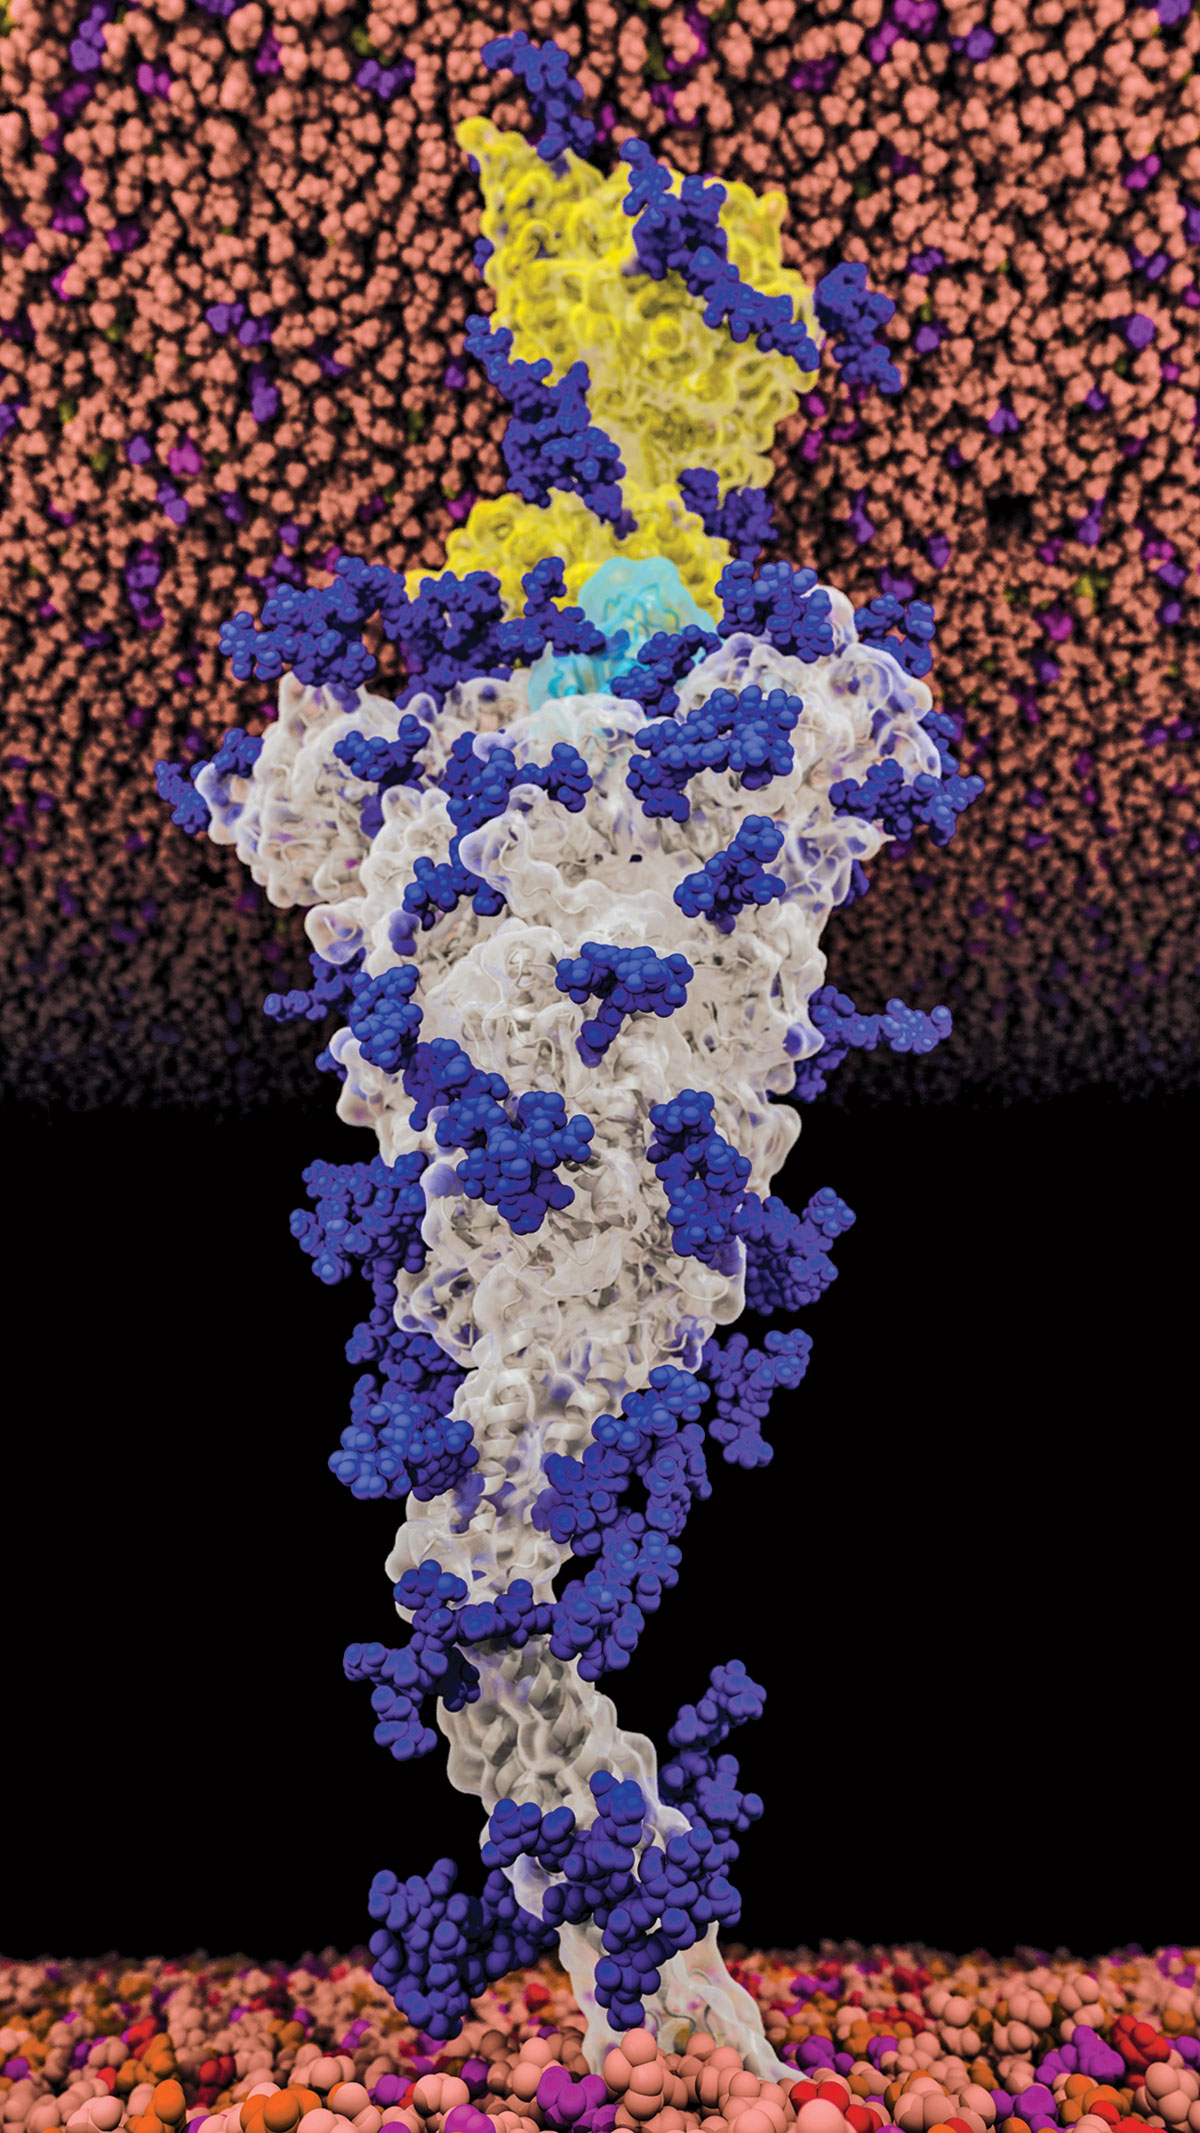 Computational scientists have made detailed models of the SARS-CoV-2 spike protein since the early months of the COVID-19 pandemic.